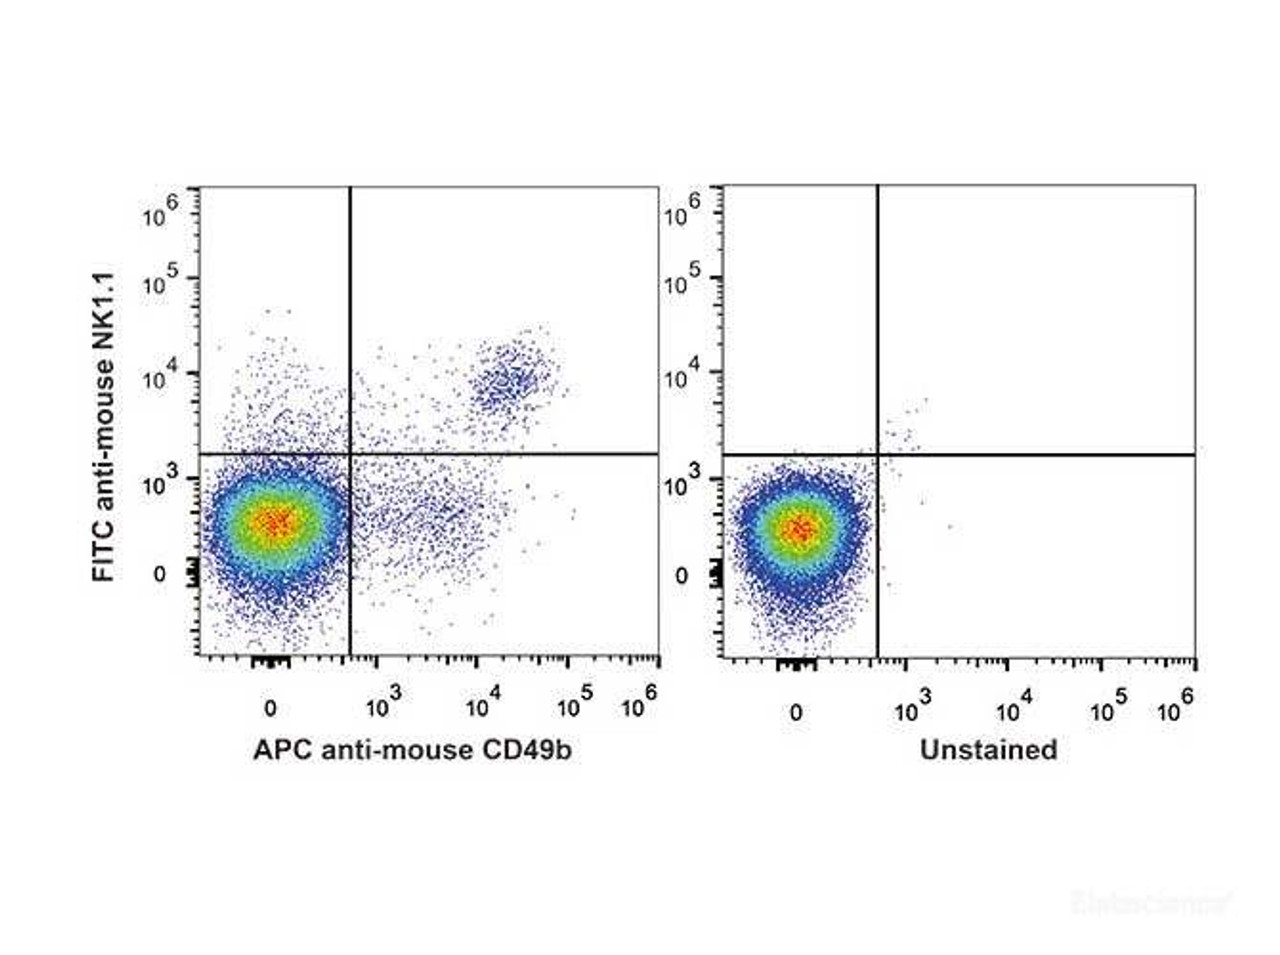 C57BL/6 murine splenocytes are stained with FITC Anti-Mouse CD161/NK1.1 Antibody[Used at .2 μg/1<sup>6</sup> cells dilution] and APC Anti-Mouse CD49b Antibody. Unstained splenocytes are used as control(Right).